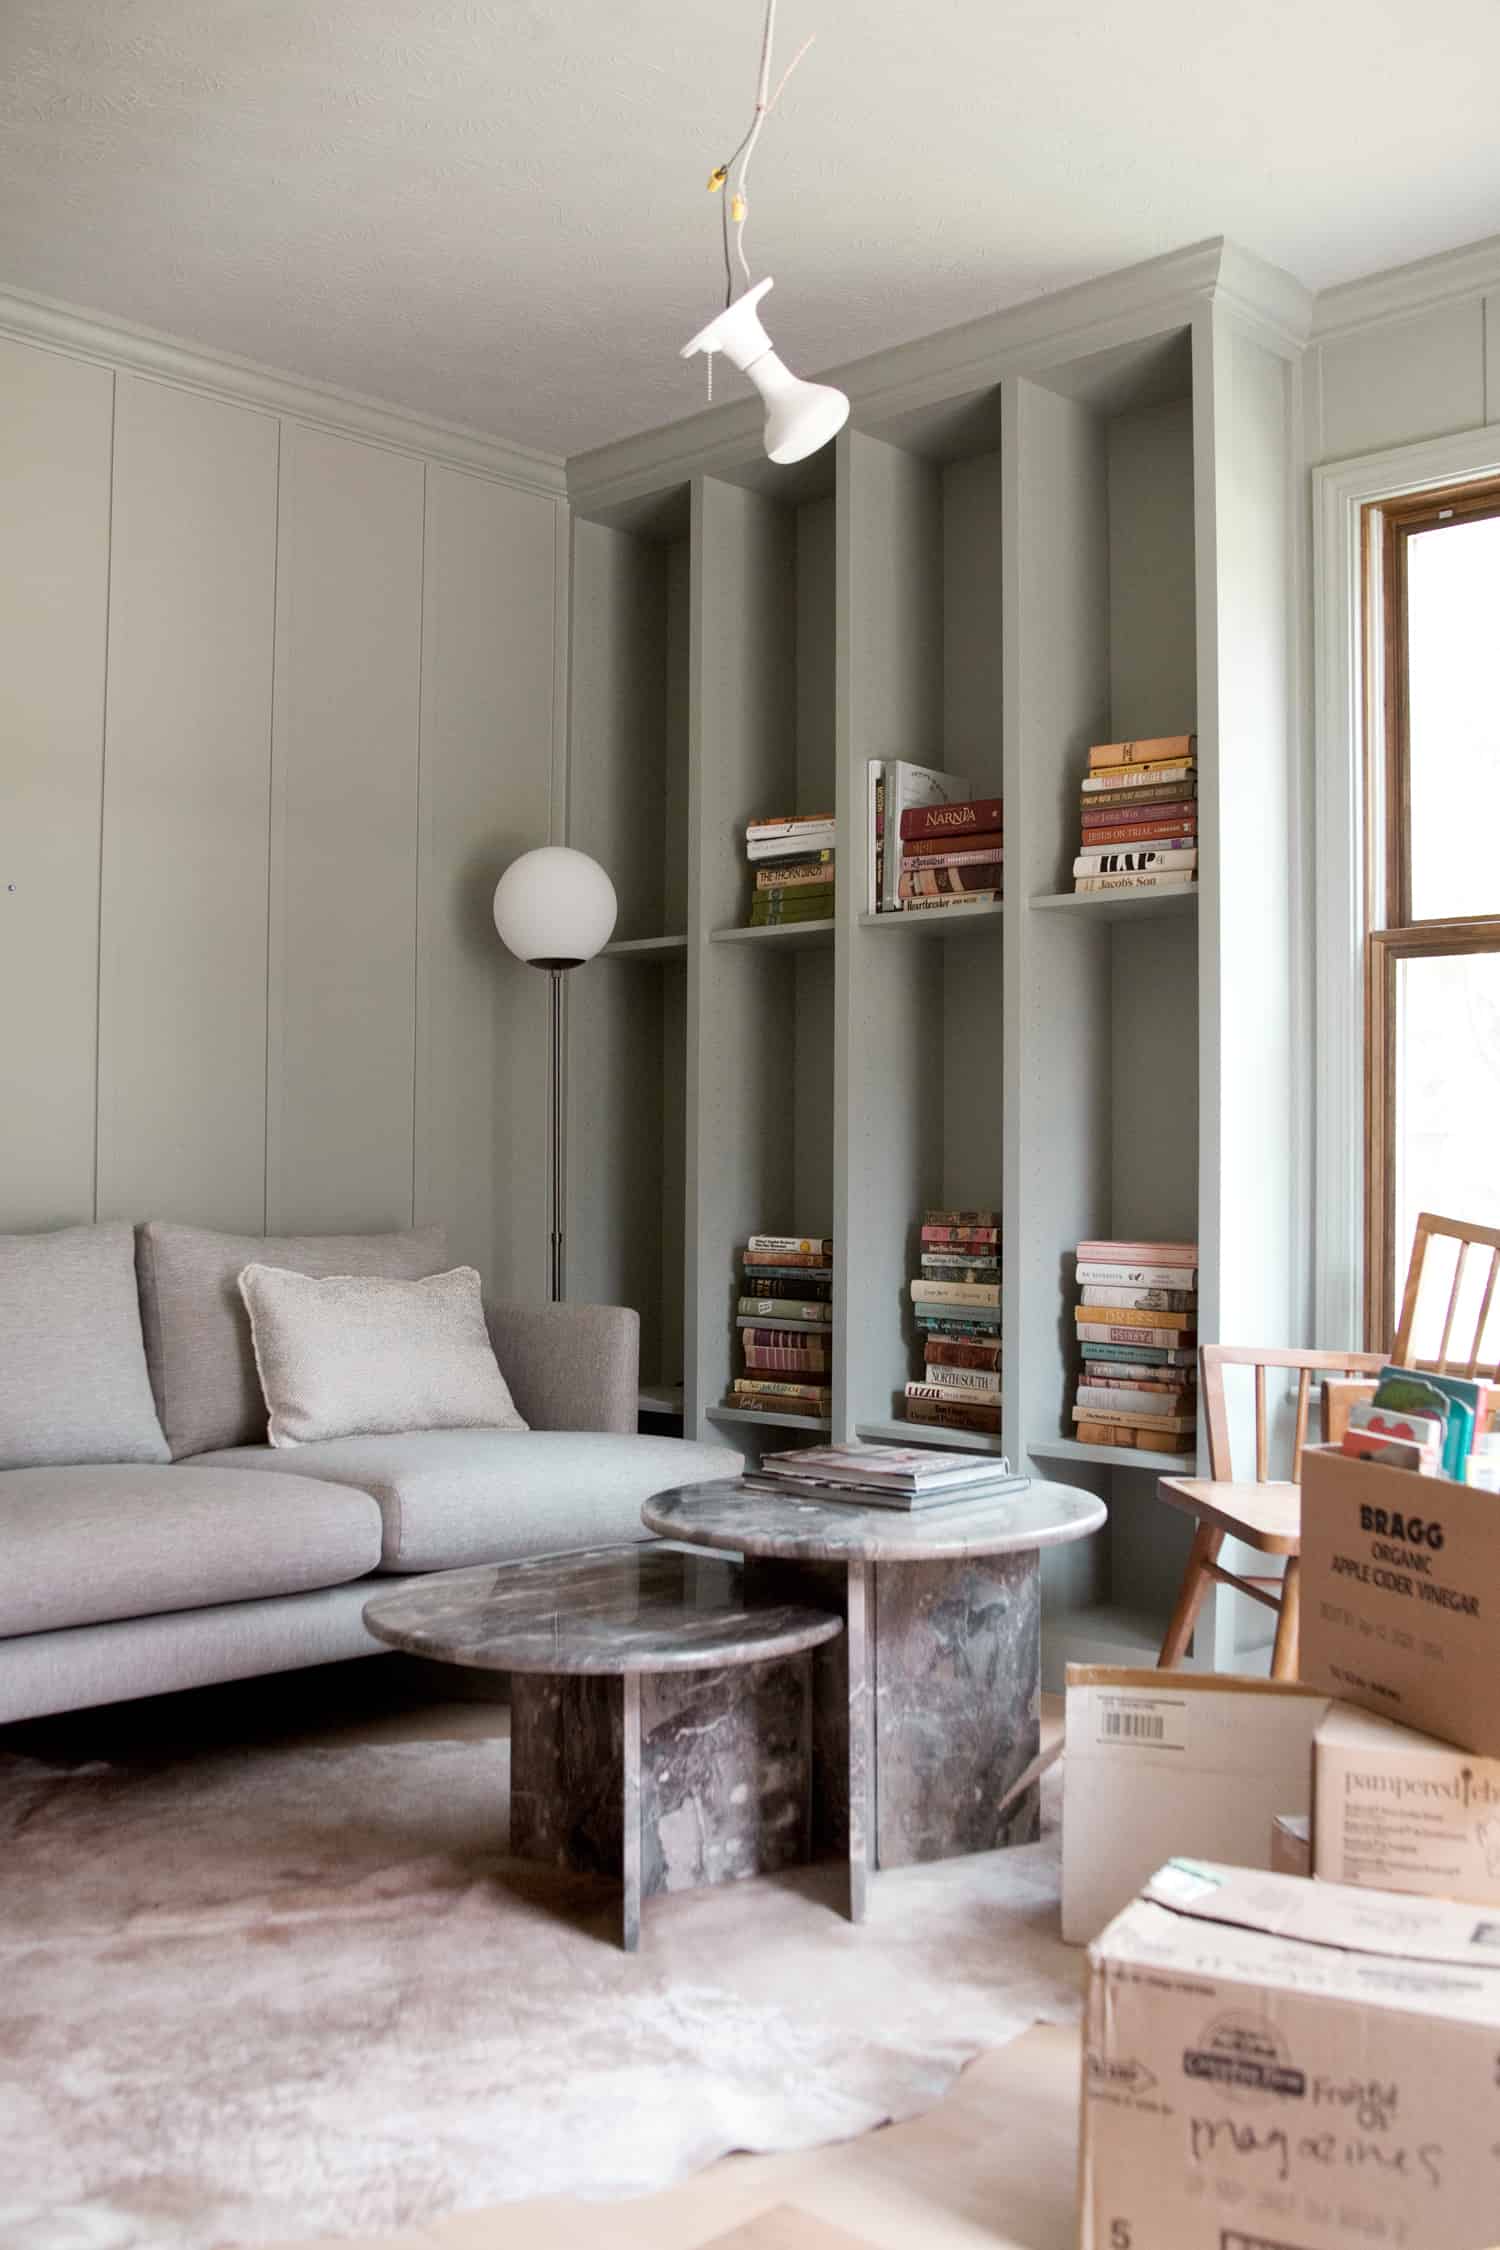 finished bookcase with piles of books on it, light fixture hanging from ceiling, boxes all over floor, gray coach, and coffee table